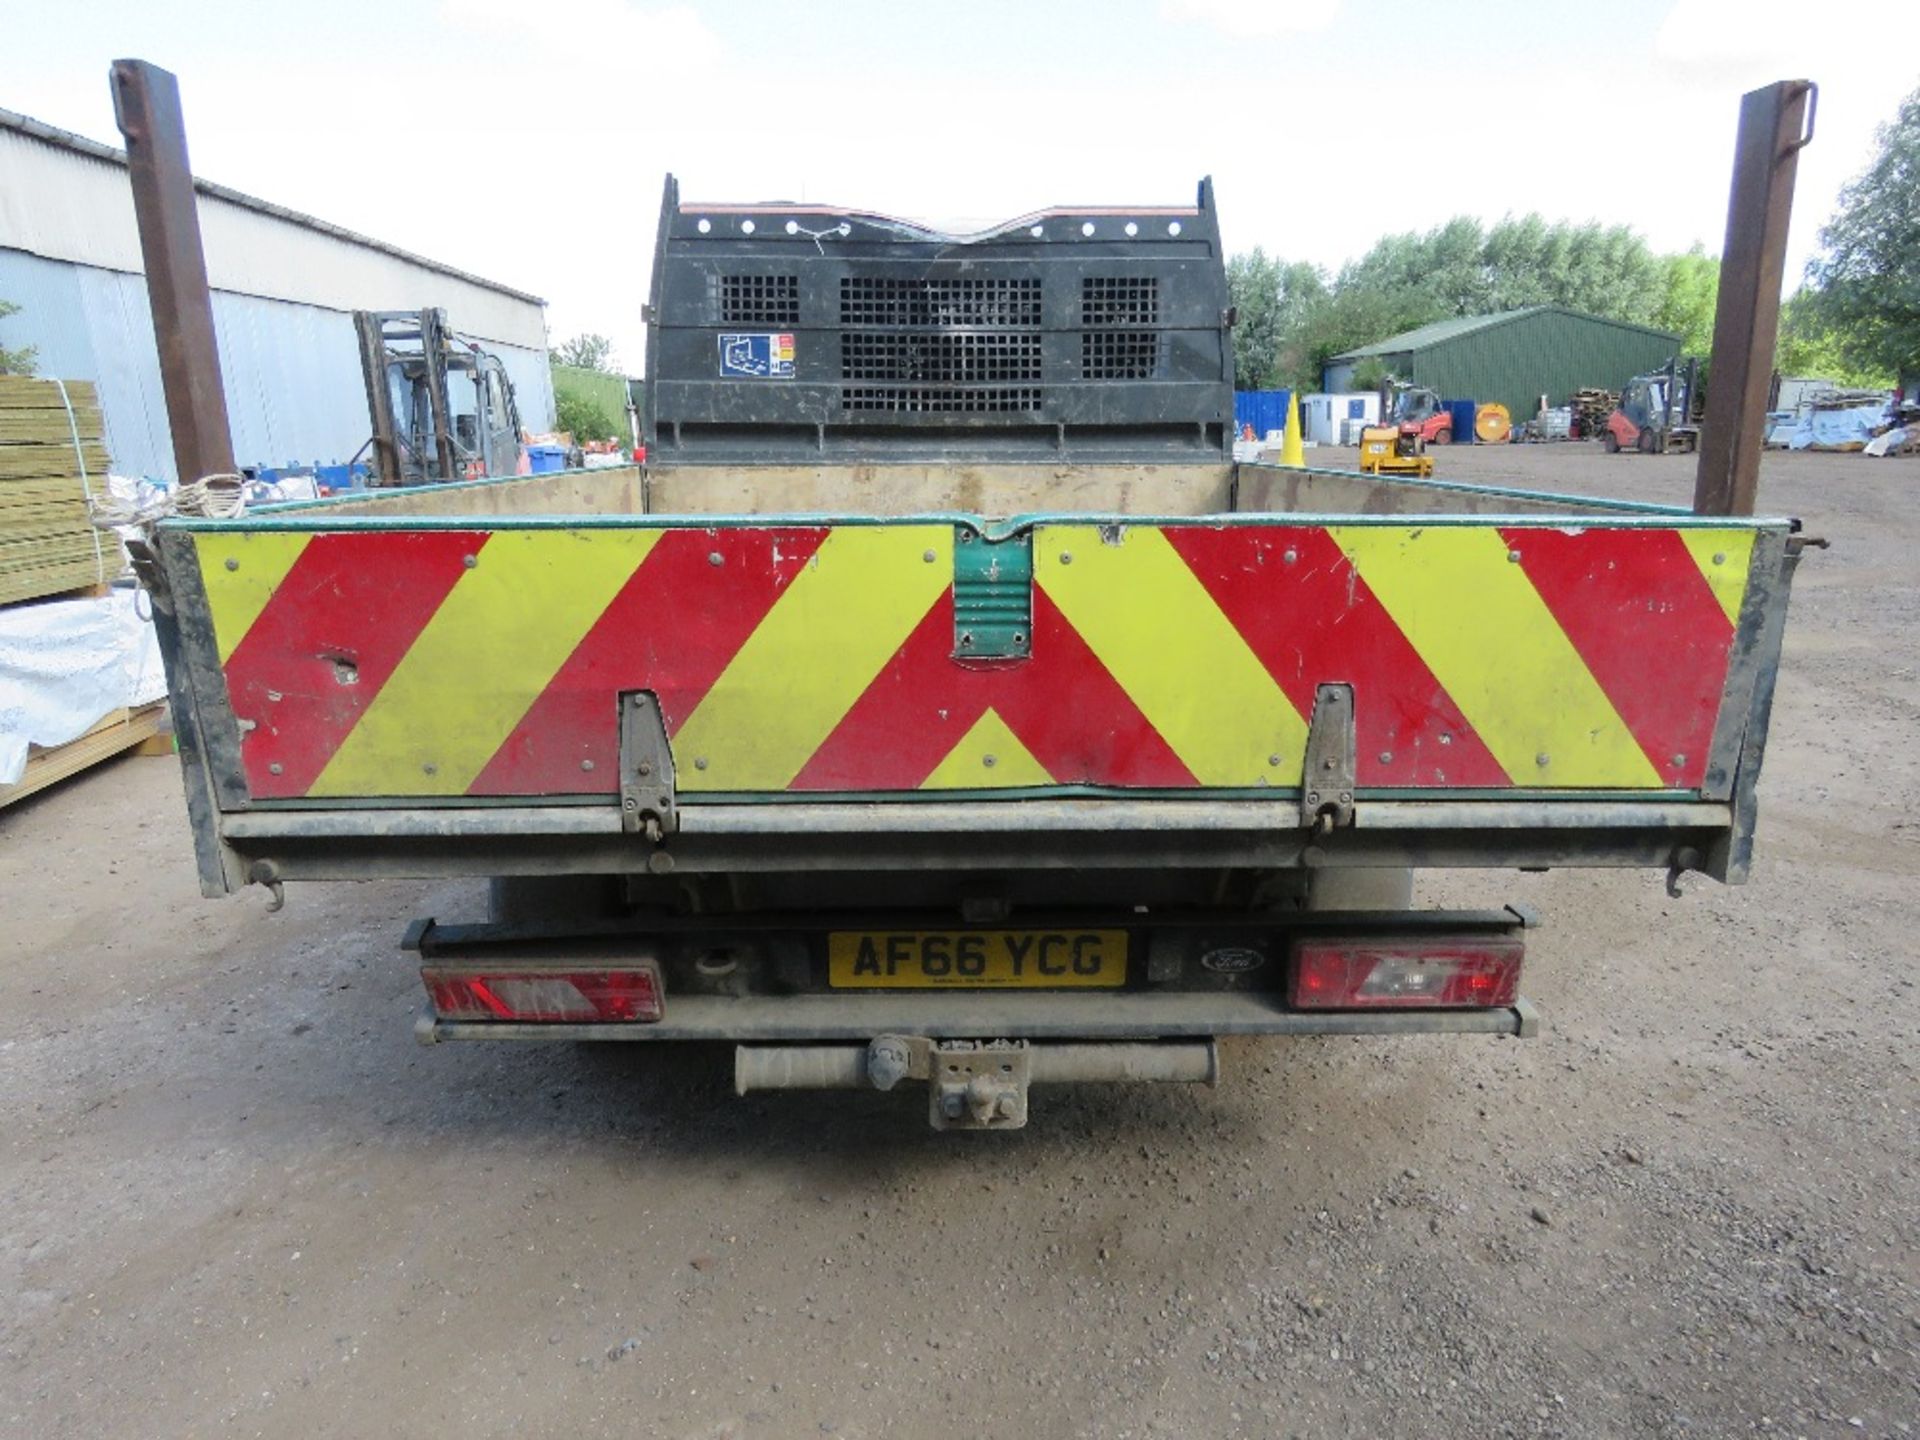 FORD TRANSIT DOUBLE / CREW CAB TIPPER TRUCK REG:AF66 YCG. WITH V5 AND MOT UNTIL 29TH SEPTEMBER 2023. - Image 7 of 17